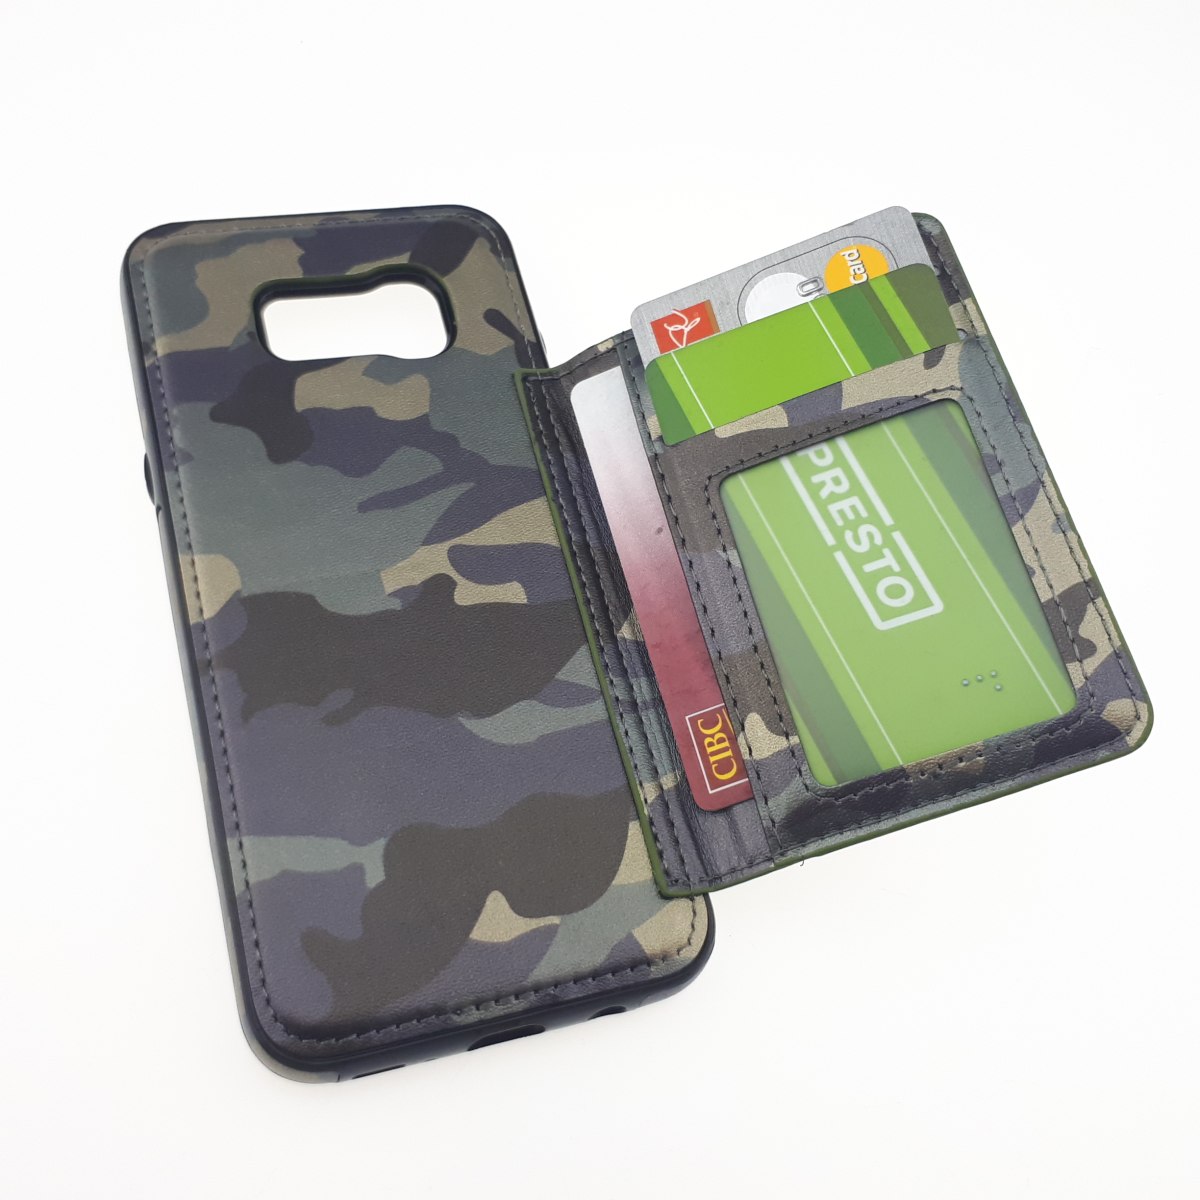 xel 3a cardholder cases